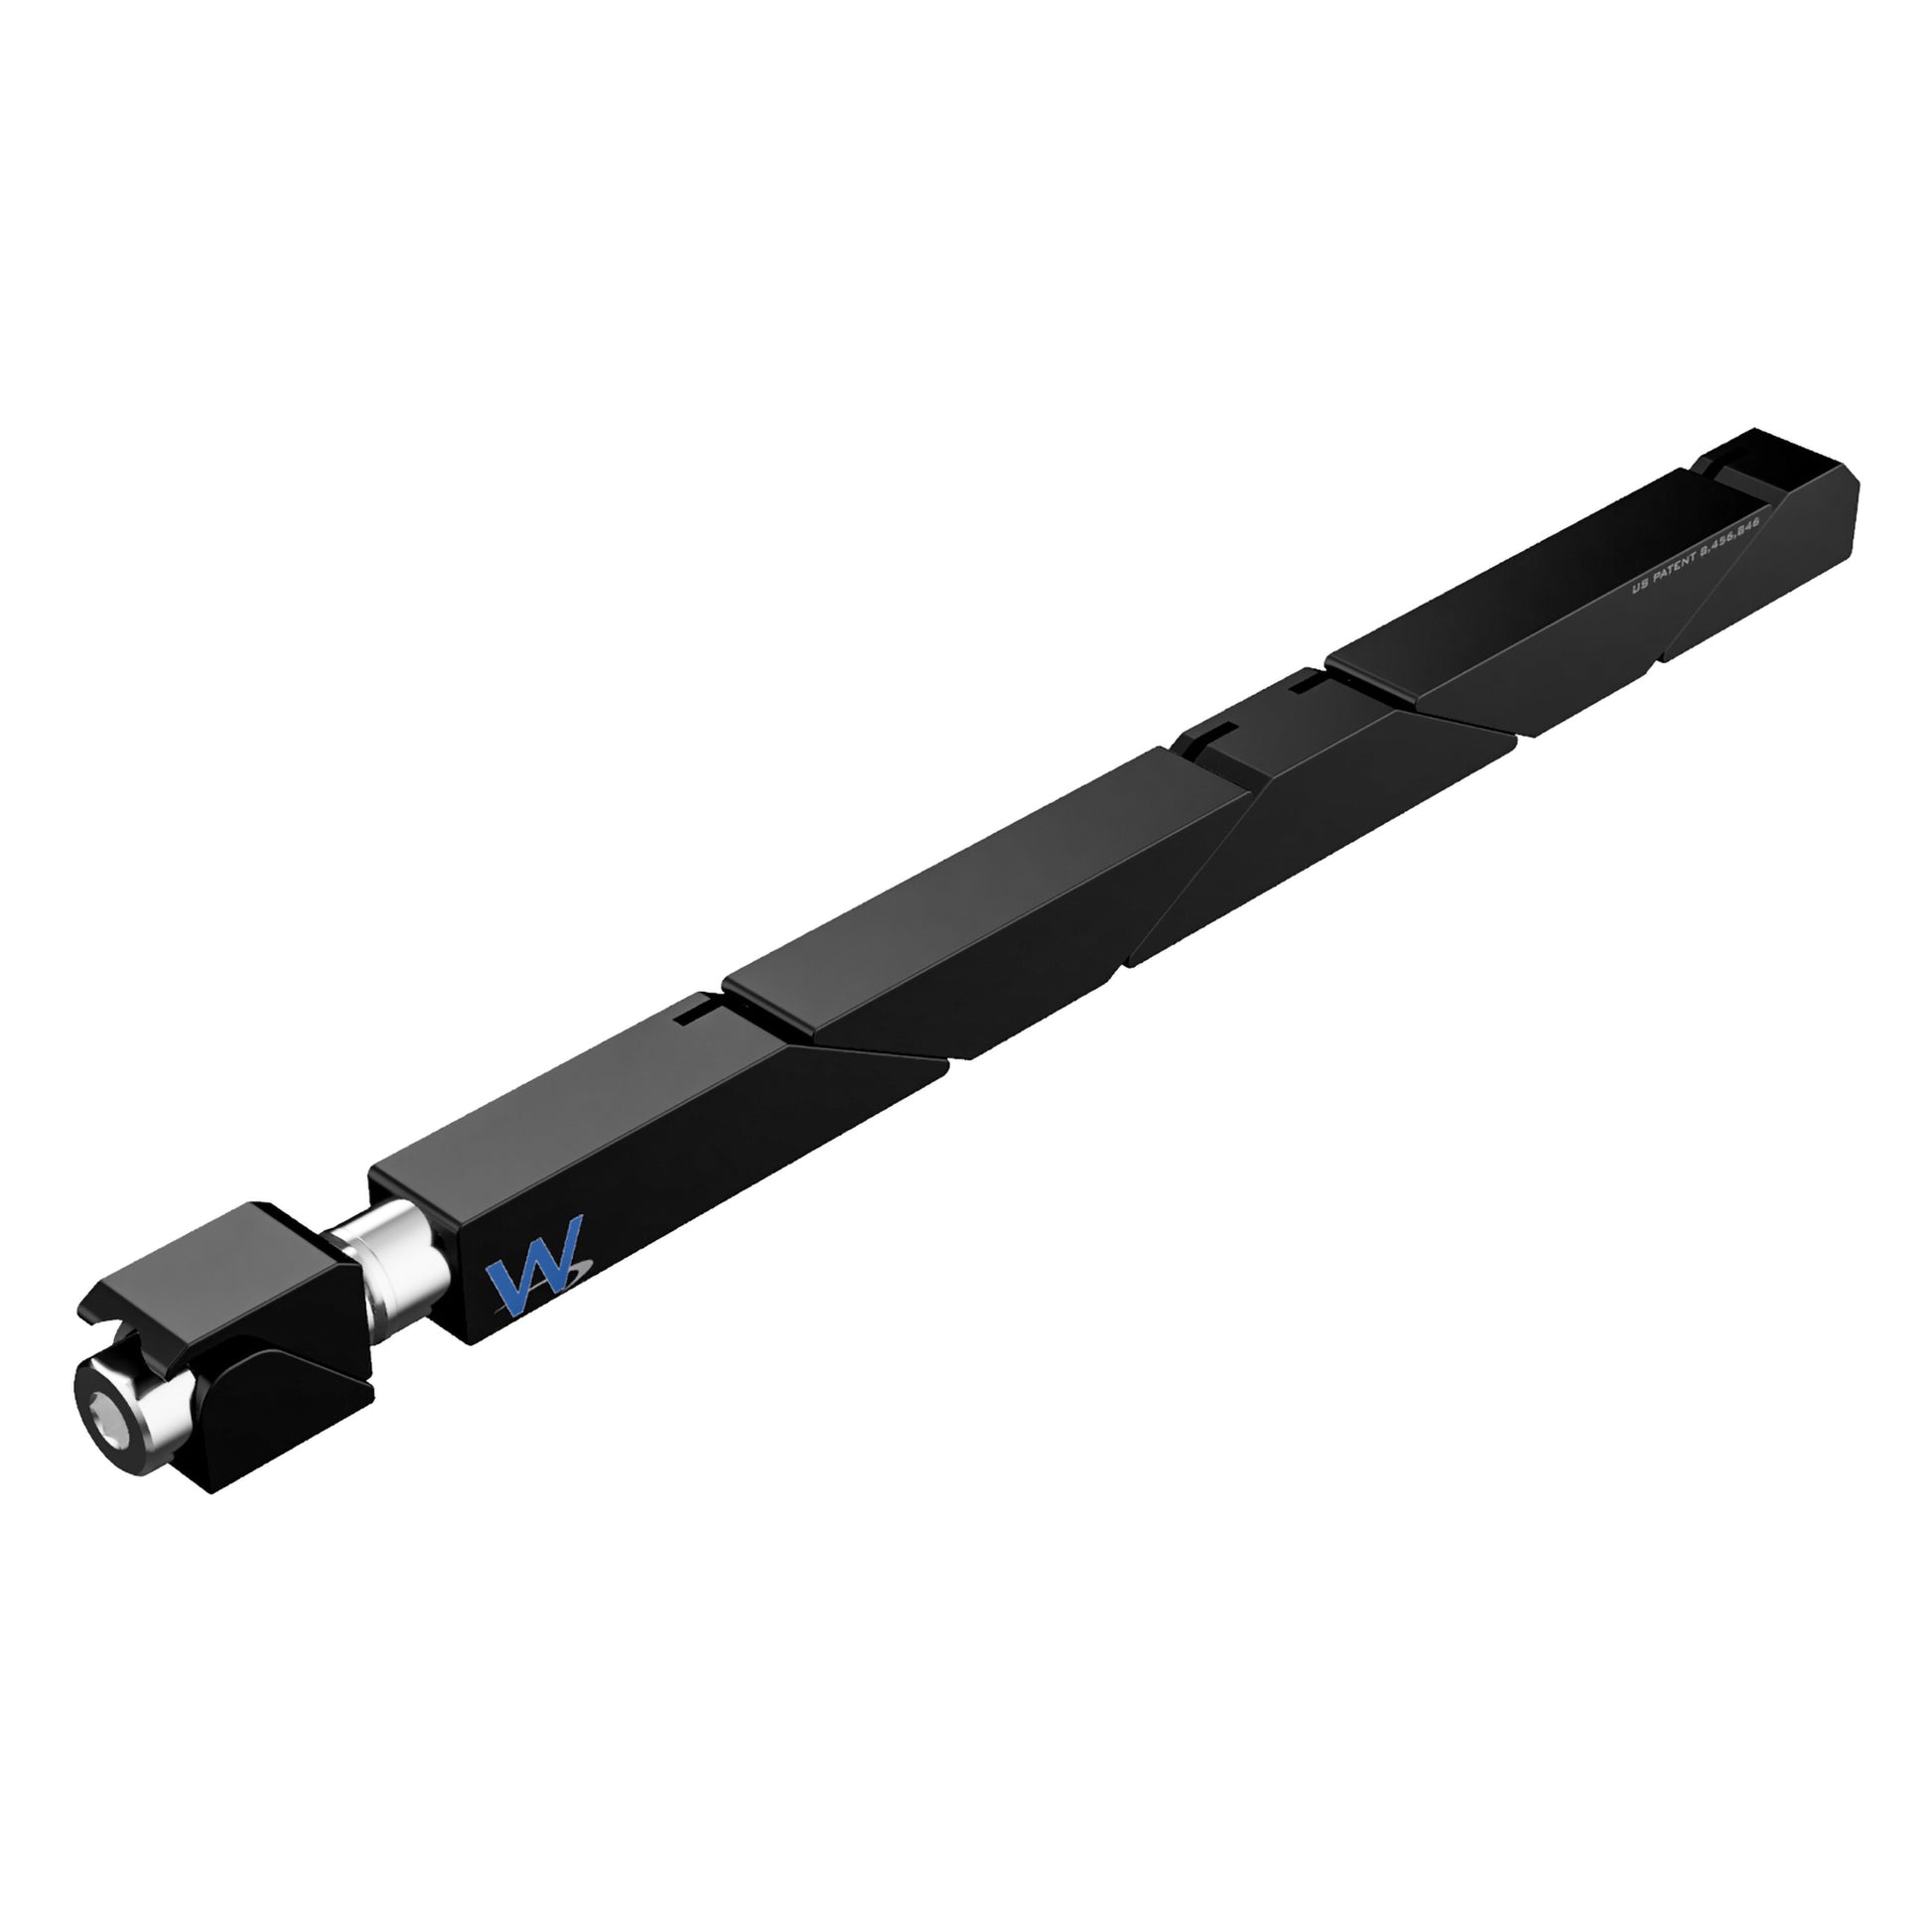 SW7-43-270-250 Max Force Belleville Wedgelock, segmented long rectulangular hardware component, Black Anodized Finish